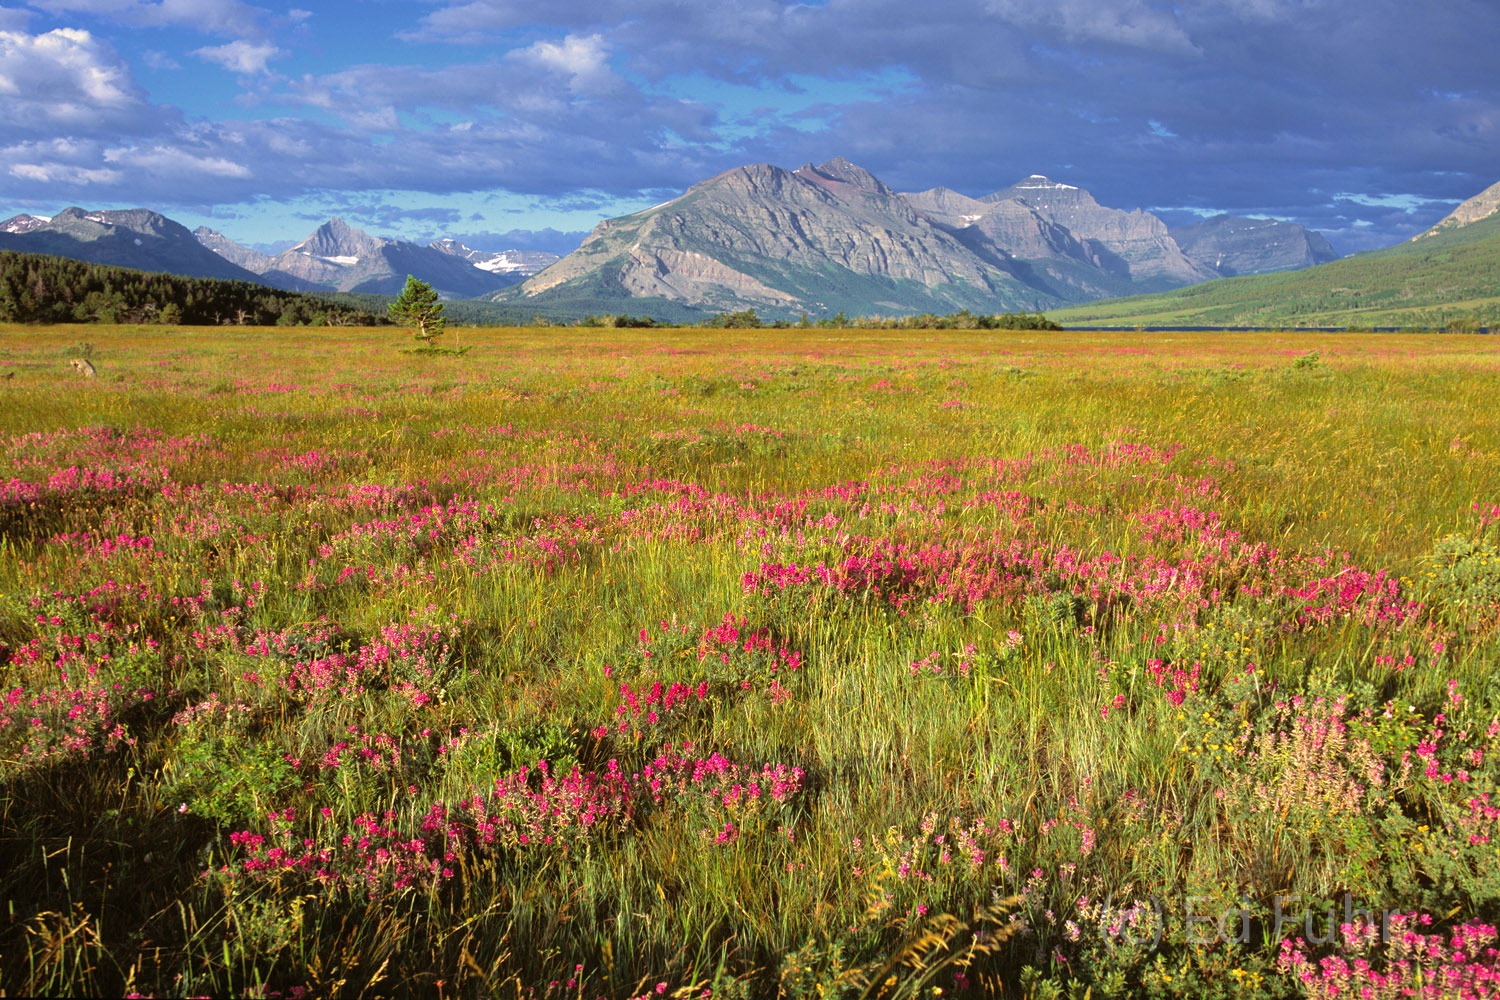 Red Eagle Mountain looms over the flower-filled meadows near the St. Mary's entrance station.